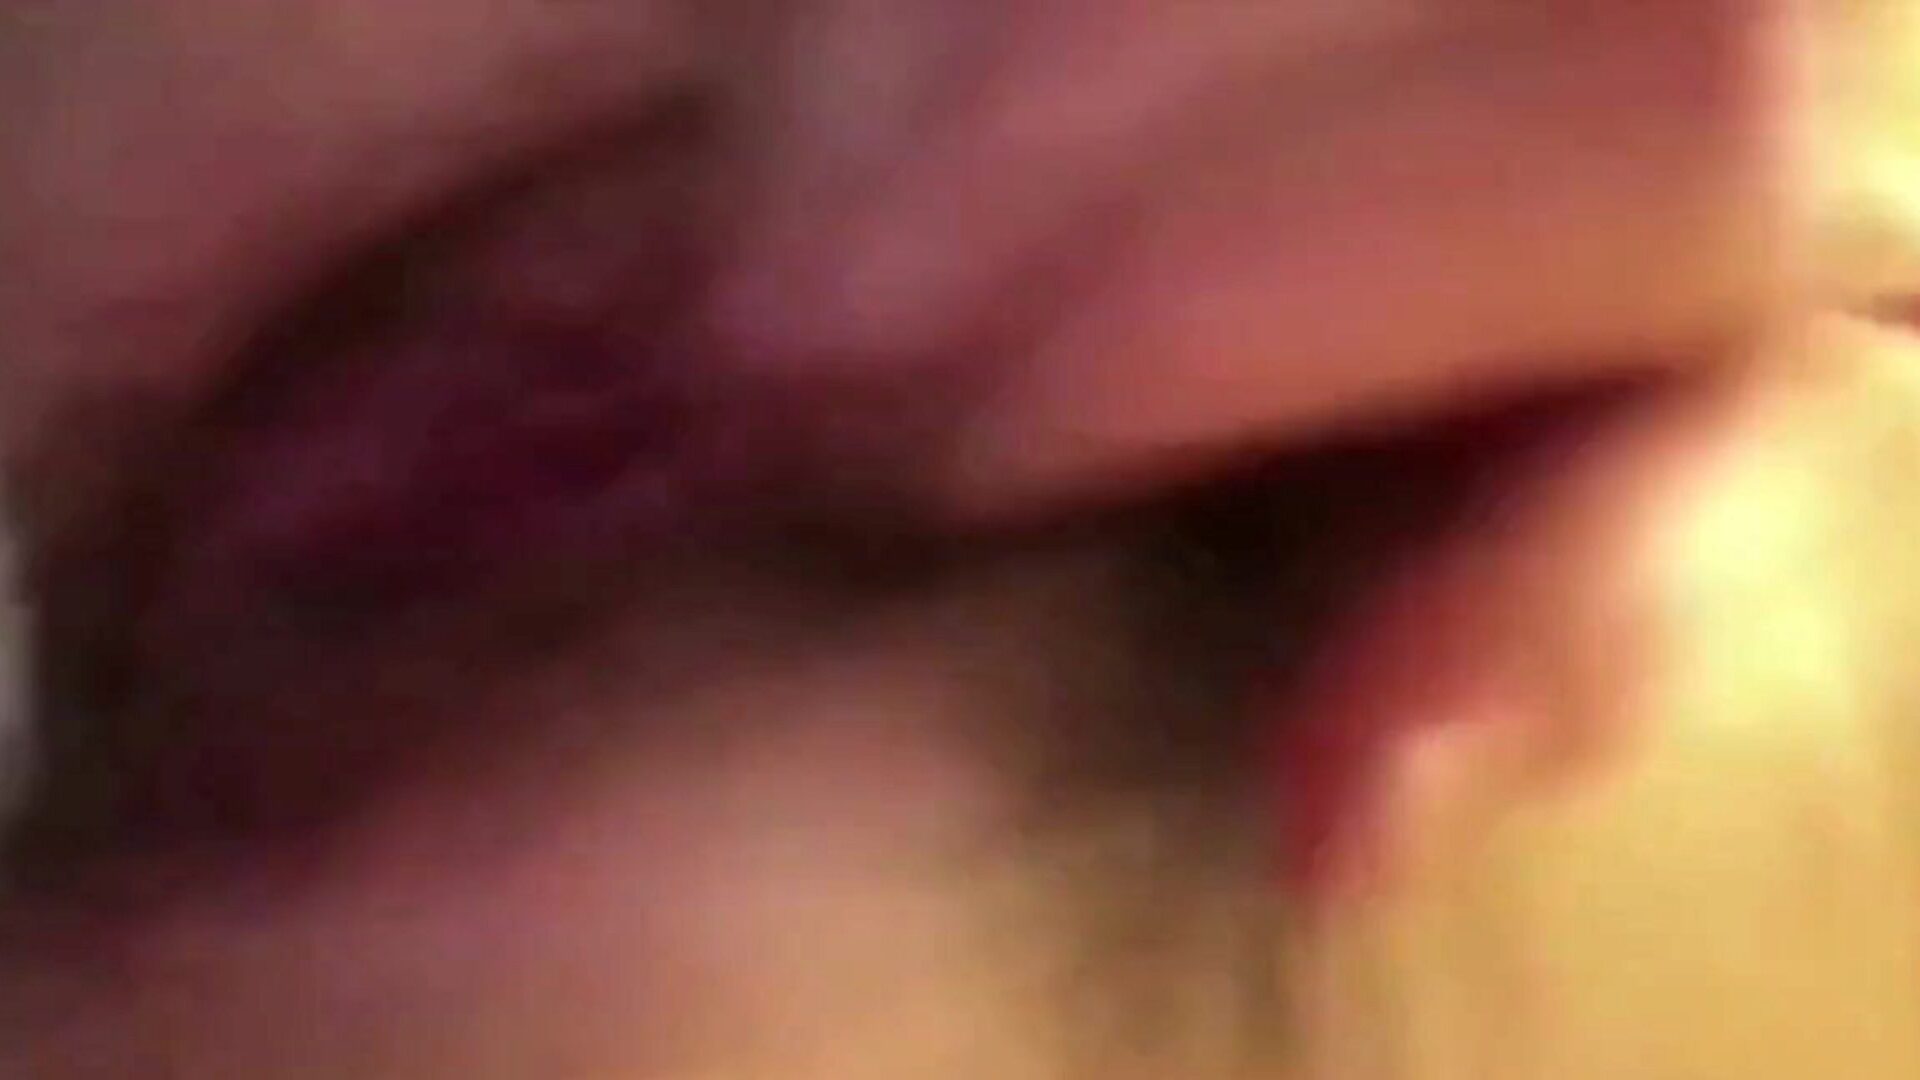 Masturbating for u Full uncircumcised movie except for a diminutive part where I kinda had to stop recording because of my parents... expect you enjoy